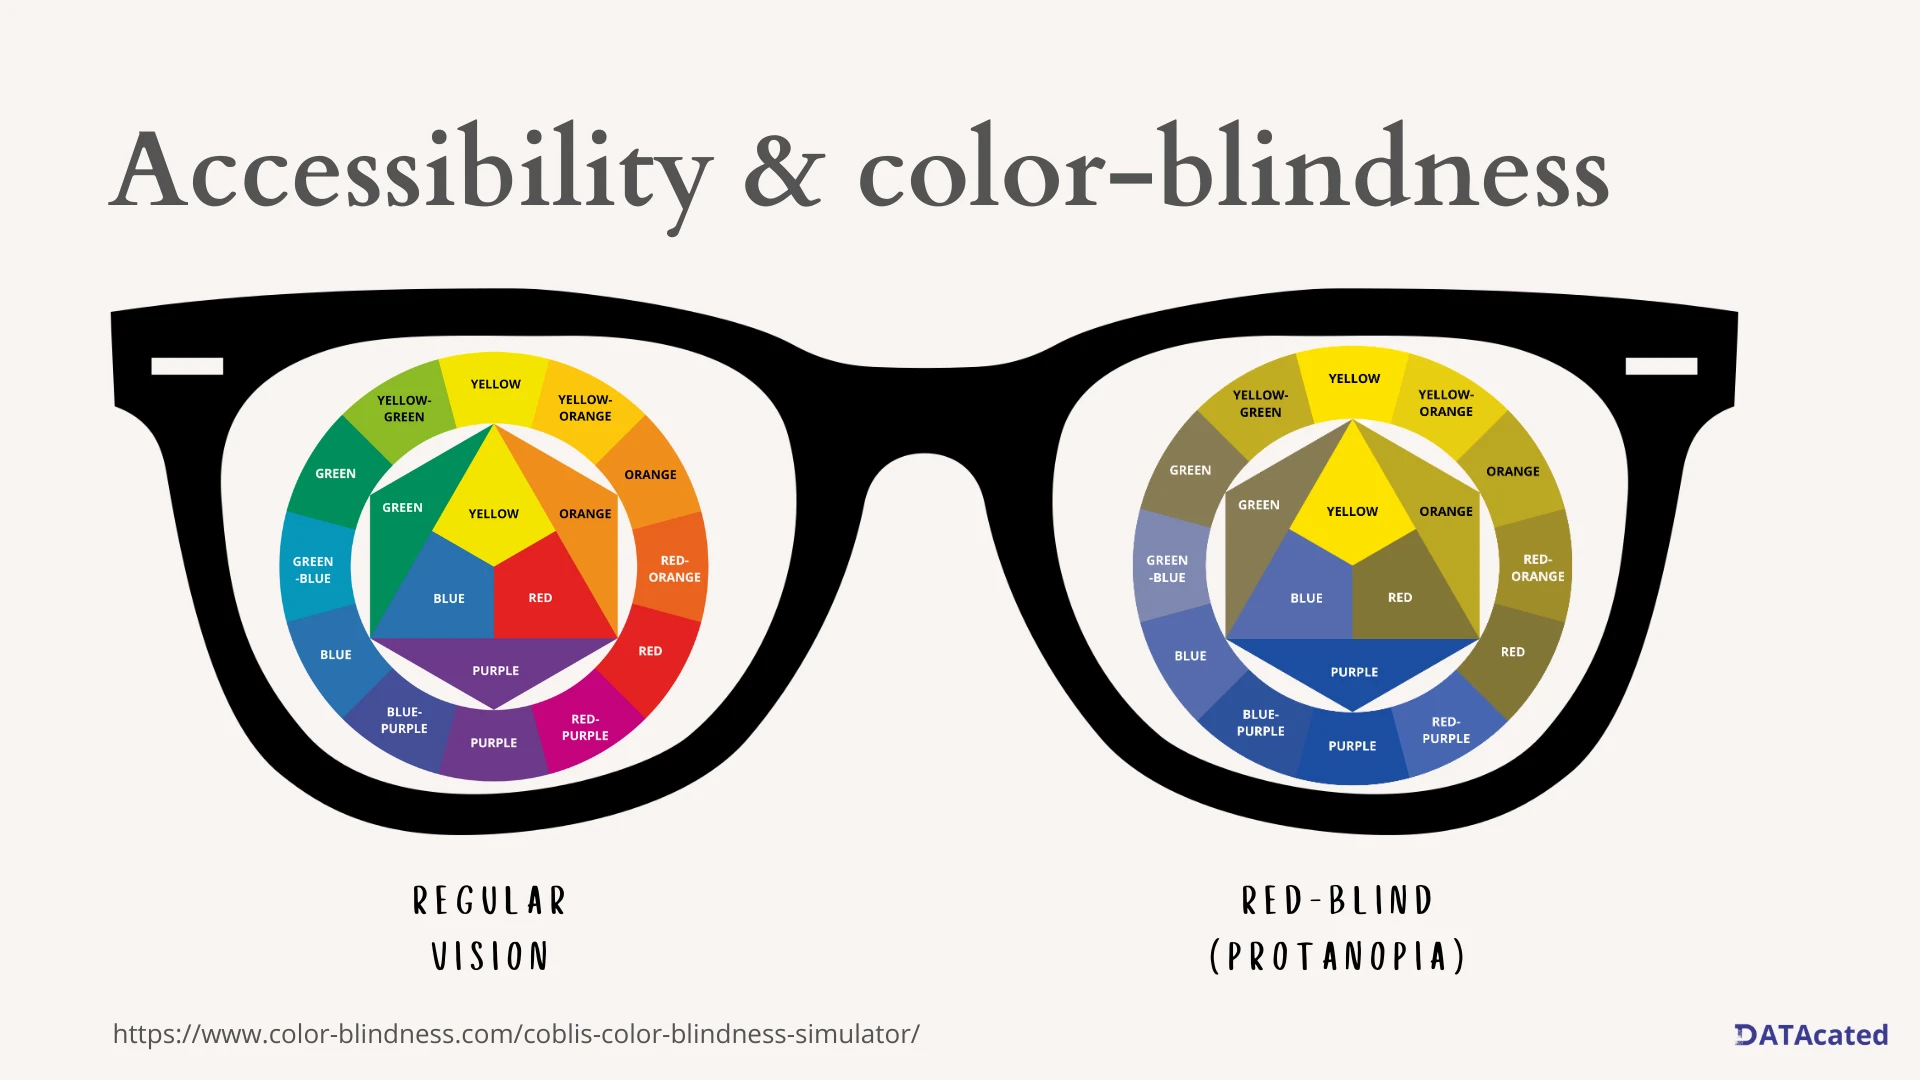 Glasses that show how colors are perceived with regular vision, compared with red-blind color vision deficiency